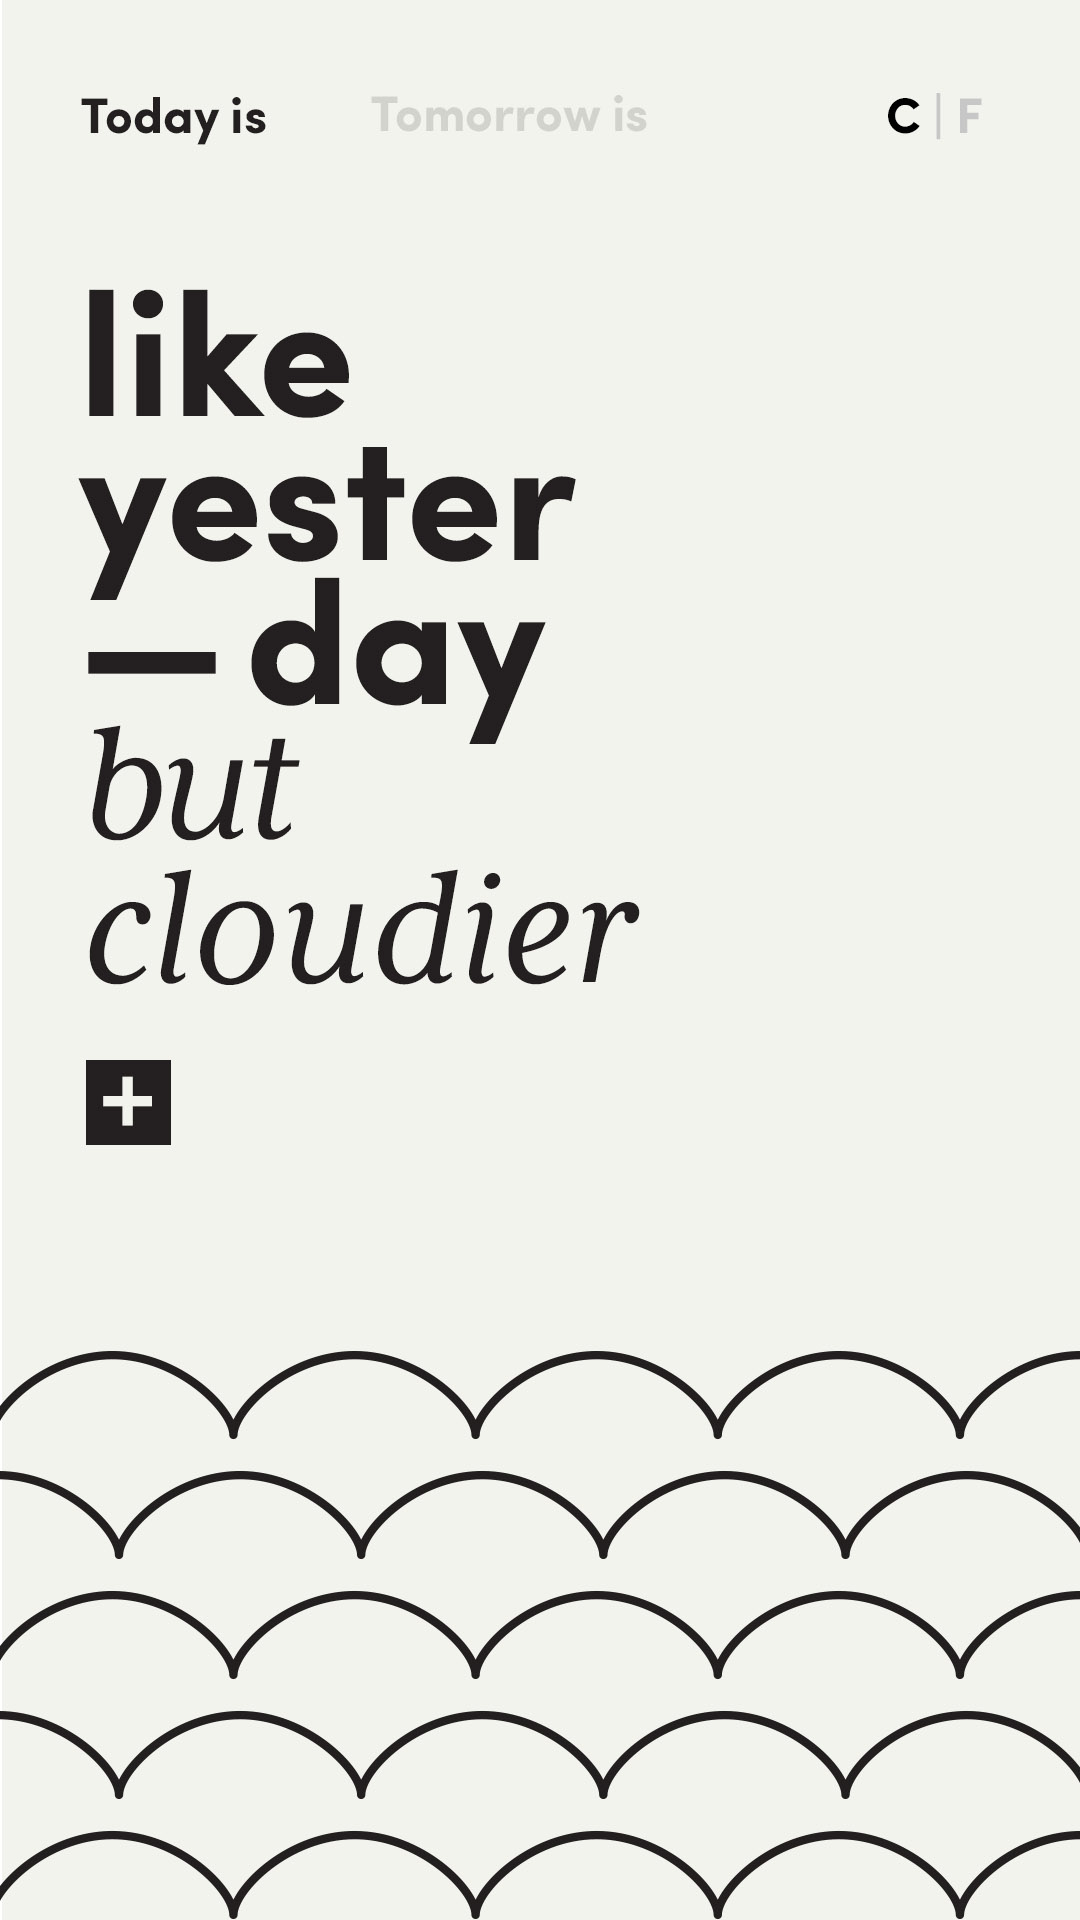 LikeYesterday_0009_but cloudier